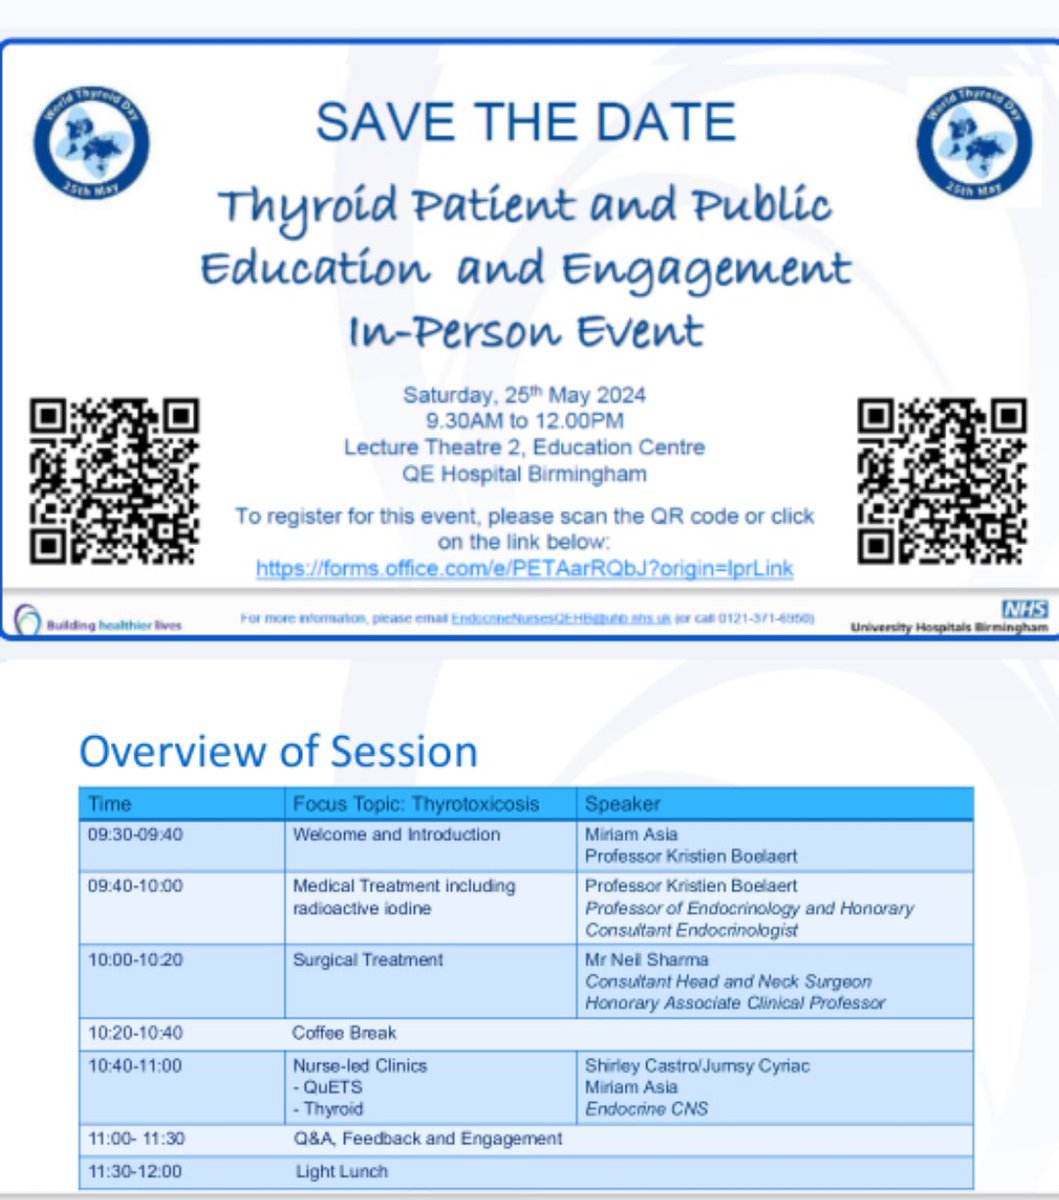 SAVE THE DATE: Thyroid Patient and Public Education and Engagement IN-PERSON EVENT @uhbtrust @ThyroidBritish @britishthyroid Focus: Thyrotoxicosis 25 May 2024 (Saturday) Please SCAN the QR CODE to register. See you there!